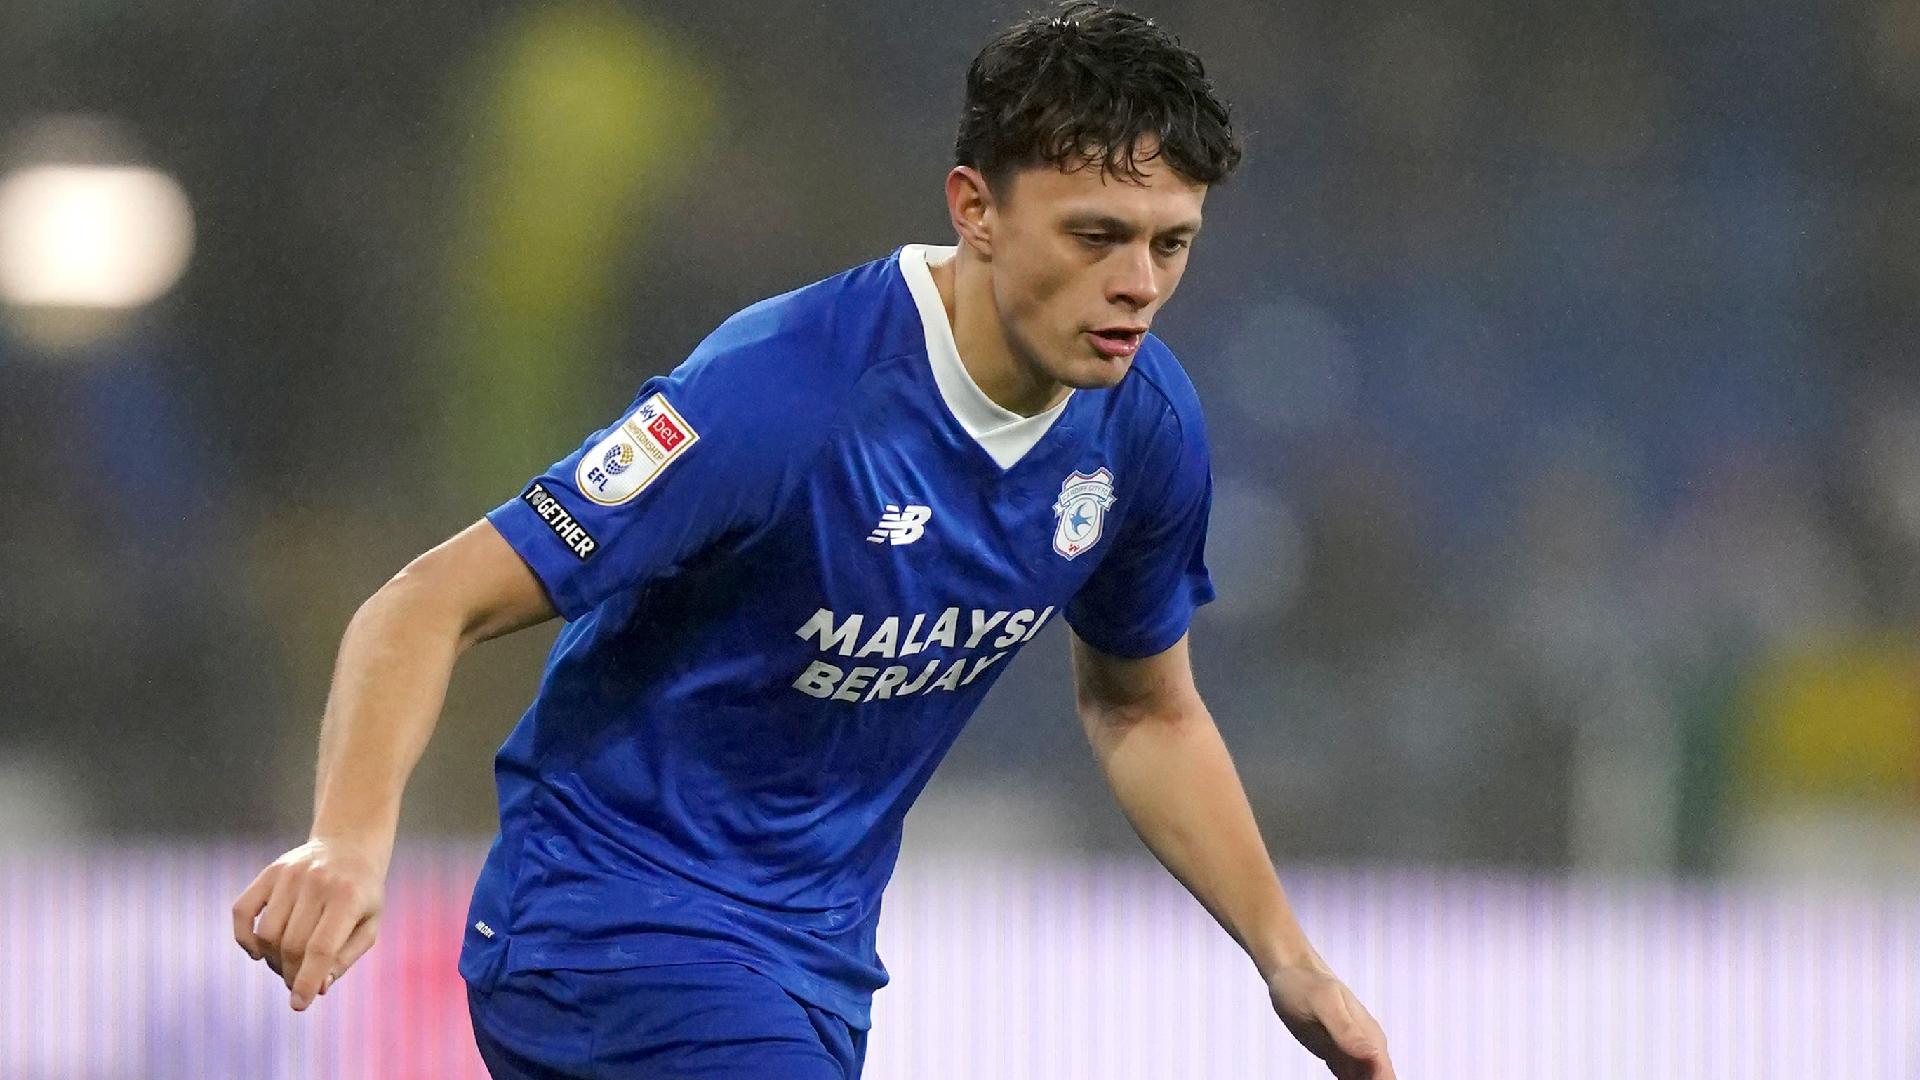 Perry Ng goal gives Cardiff another derby victory over Bristol City